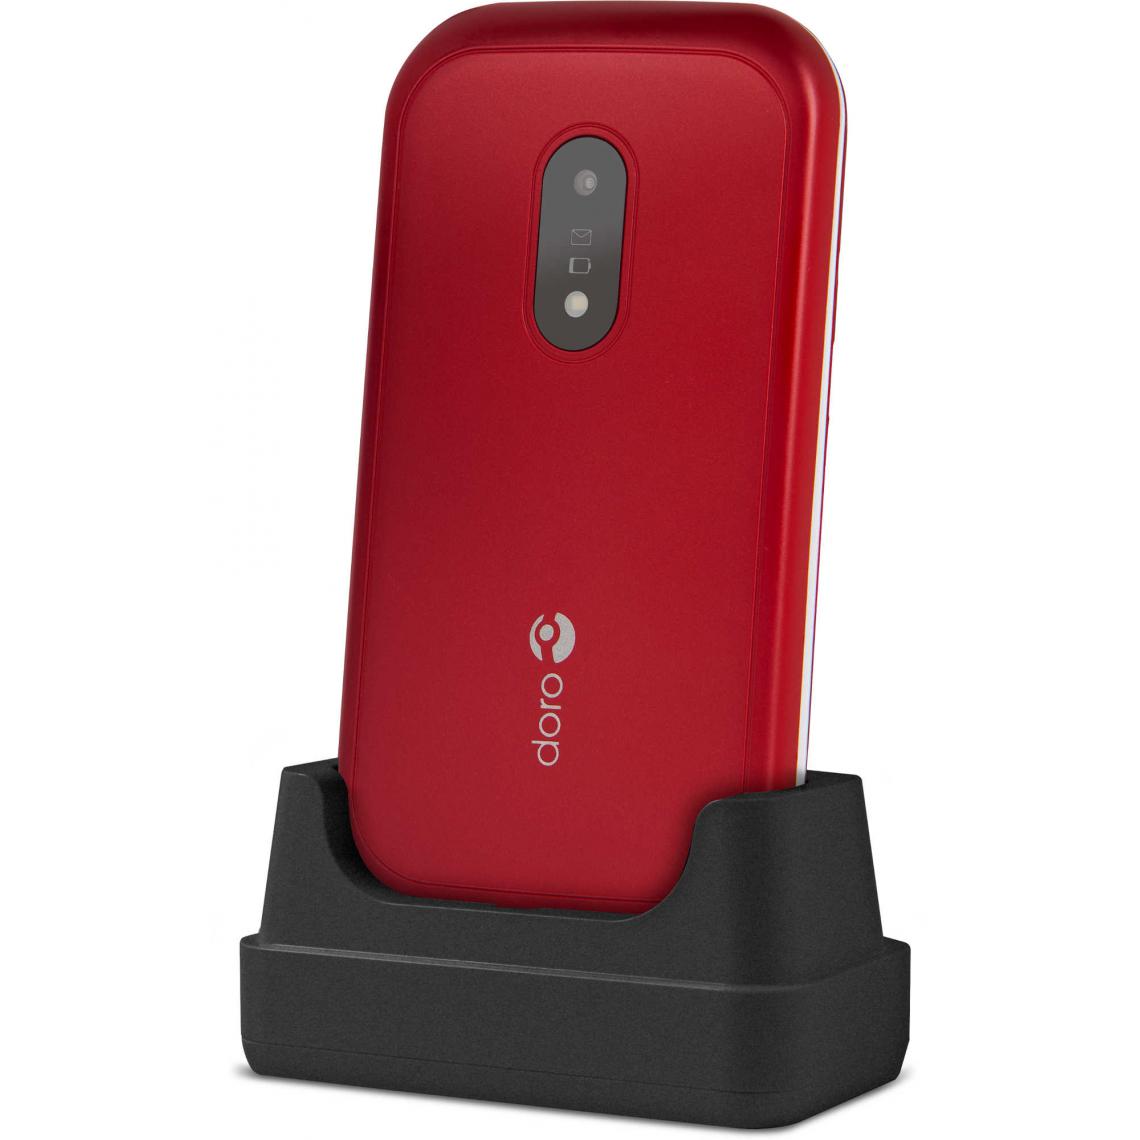 Doro - Téléphone mobile DORO 6040 ROUGE - Smartphone Android